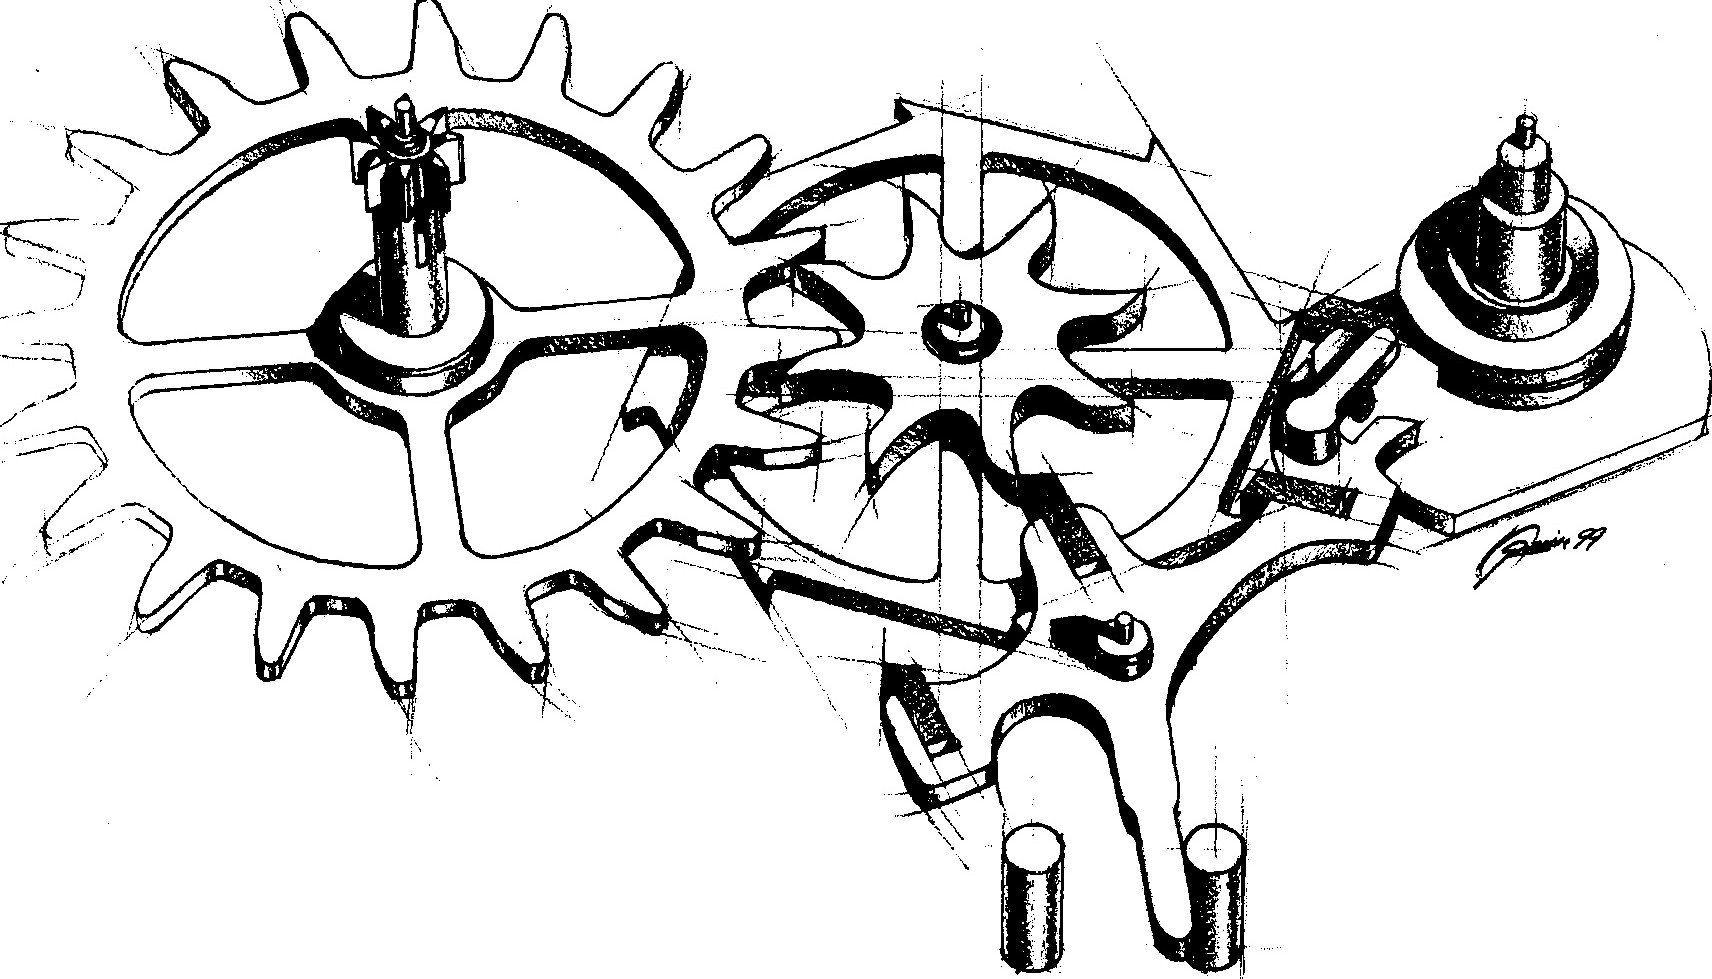 George Daniels co-axial escapement drawing